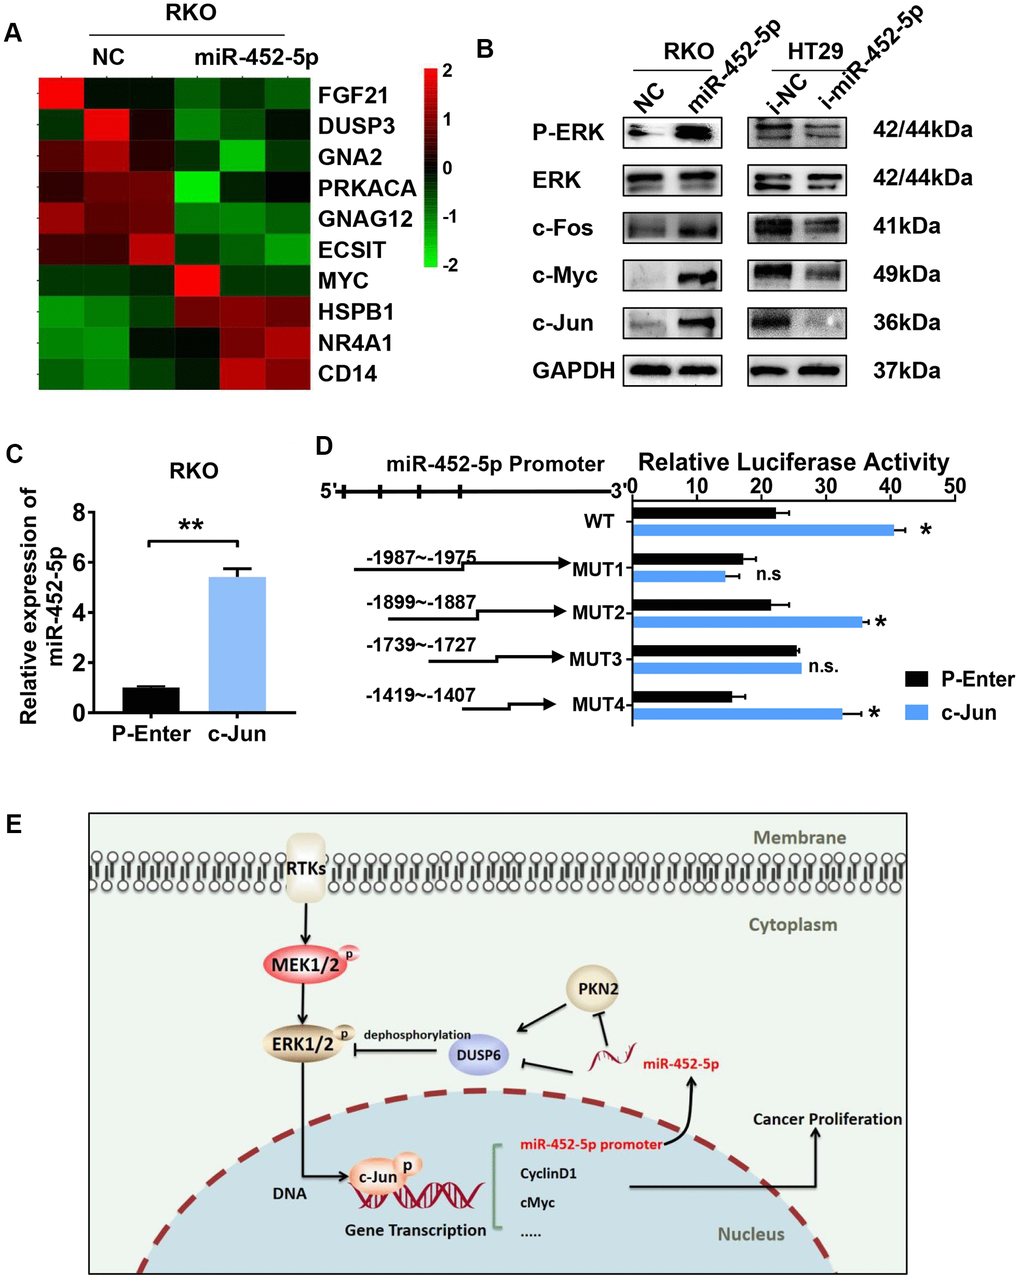 C-jun regulates the expression of miR-452-5p by promoting its transcription. (A) Heatmap analysis showed the MAPK signaling pathway genes as identified by sequencing. (B) Western blotting results of ERK/MAPK signaling pathway. (C) The expression of miR-452-5p after overexpression of c-Jun detected by qRT-PCR. (D) Luciferase reporter gene assay verified the direct transcriptional regulation effect of c-Jun on miR-452-5p. (E) A hypothetical model illustrating that miR-452-5p promotes the malignant behaviors of CRC through the miR-452-5p—PKN2/DUSP6—c-Jun positive feedback loop.*p 